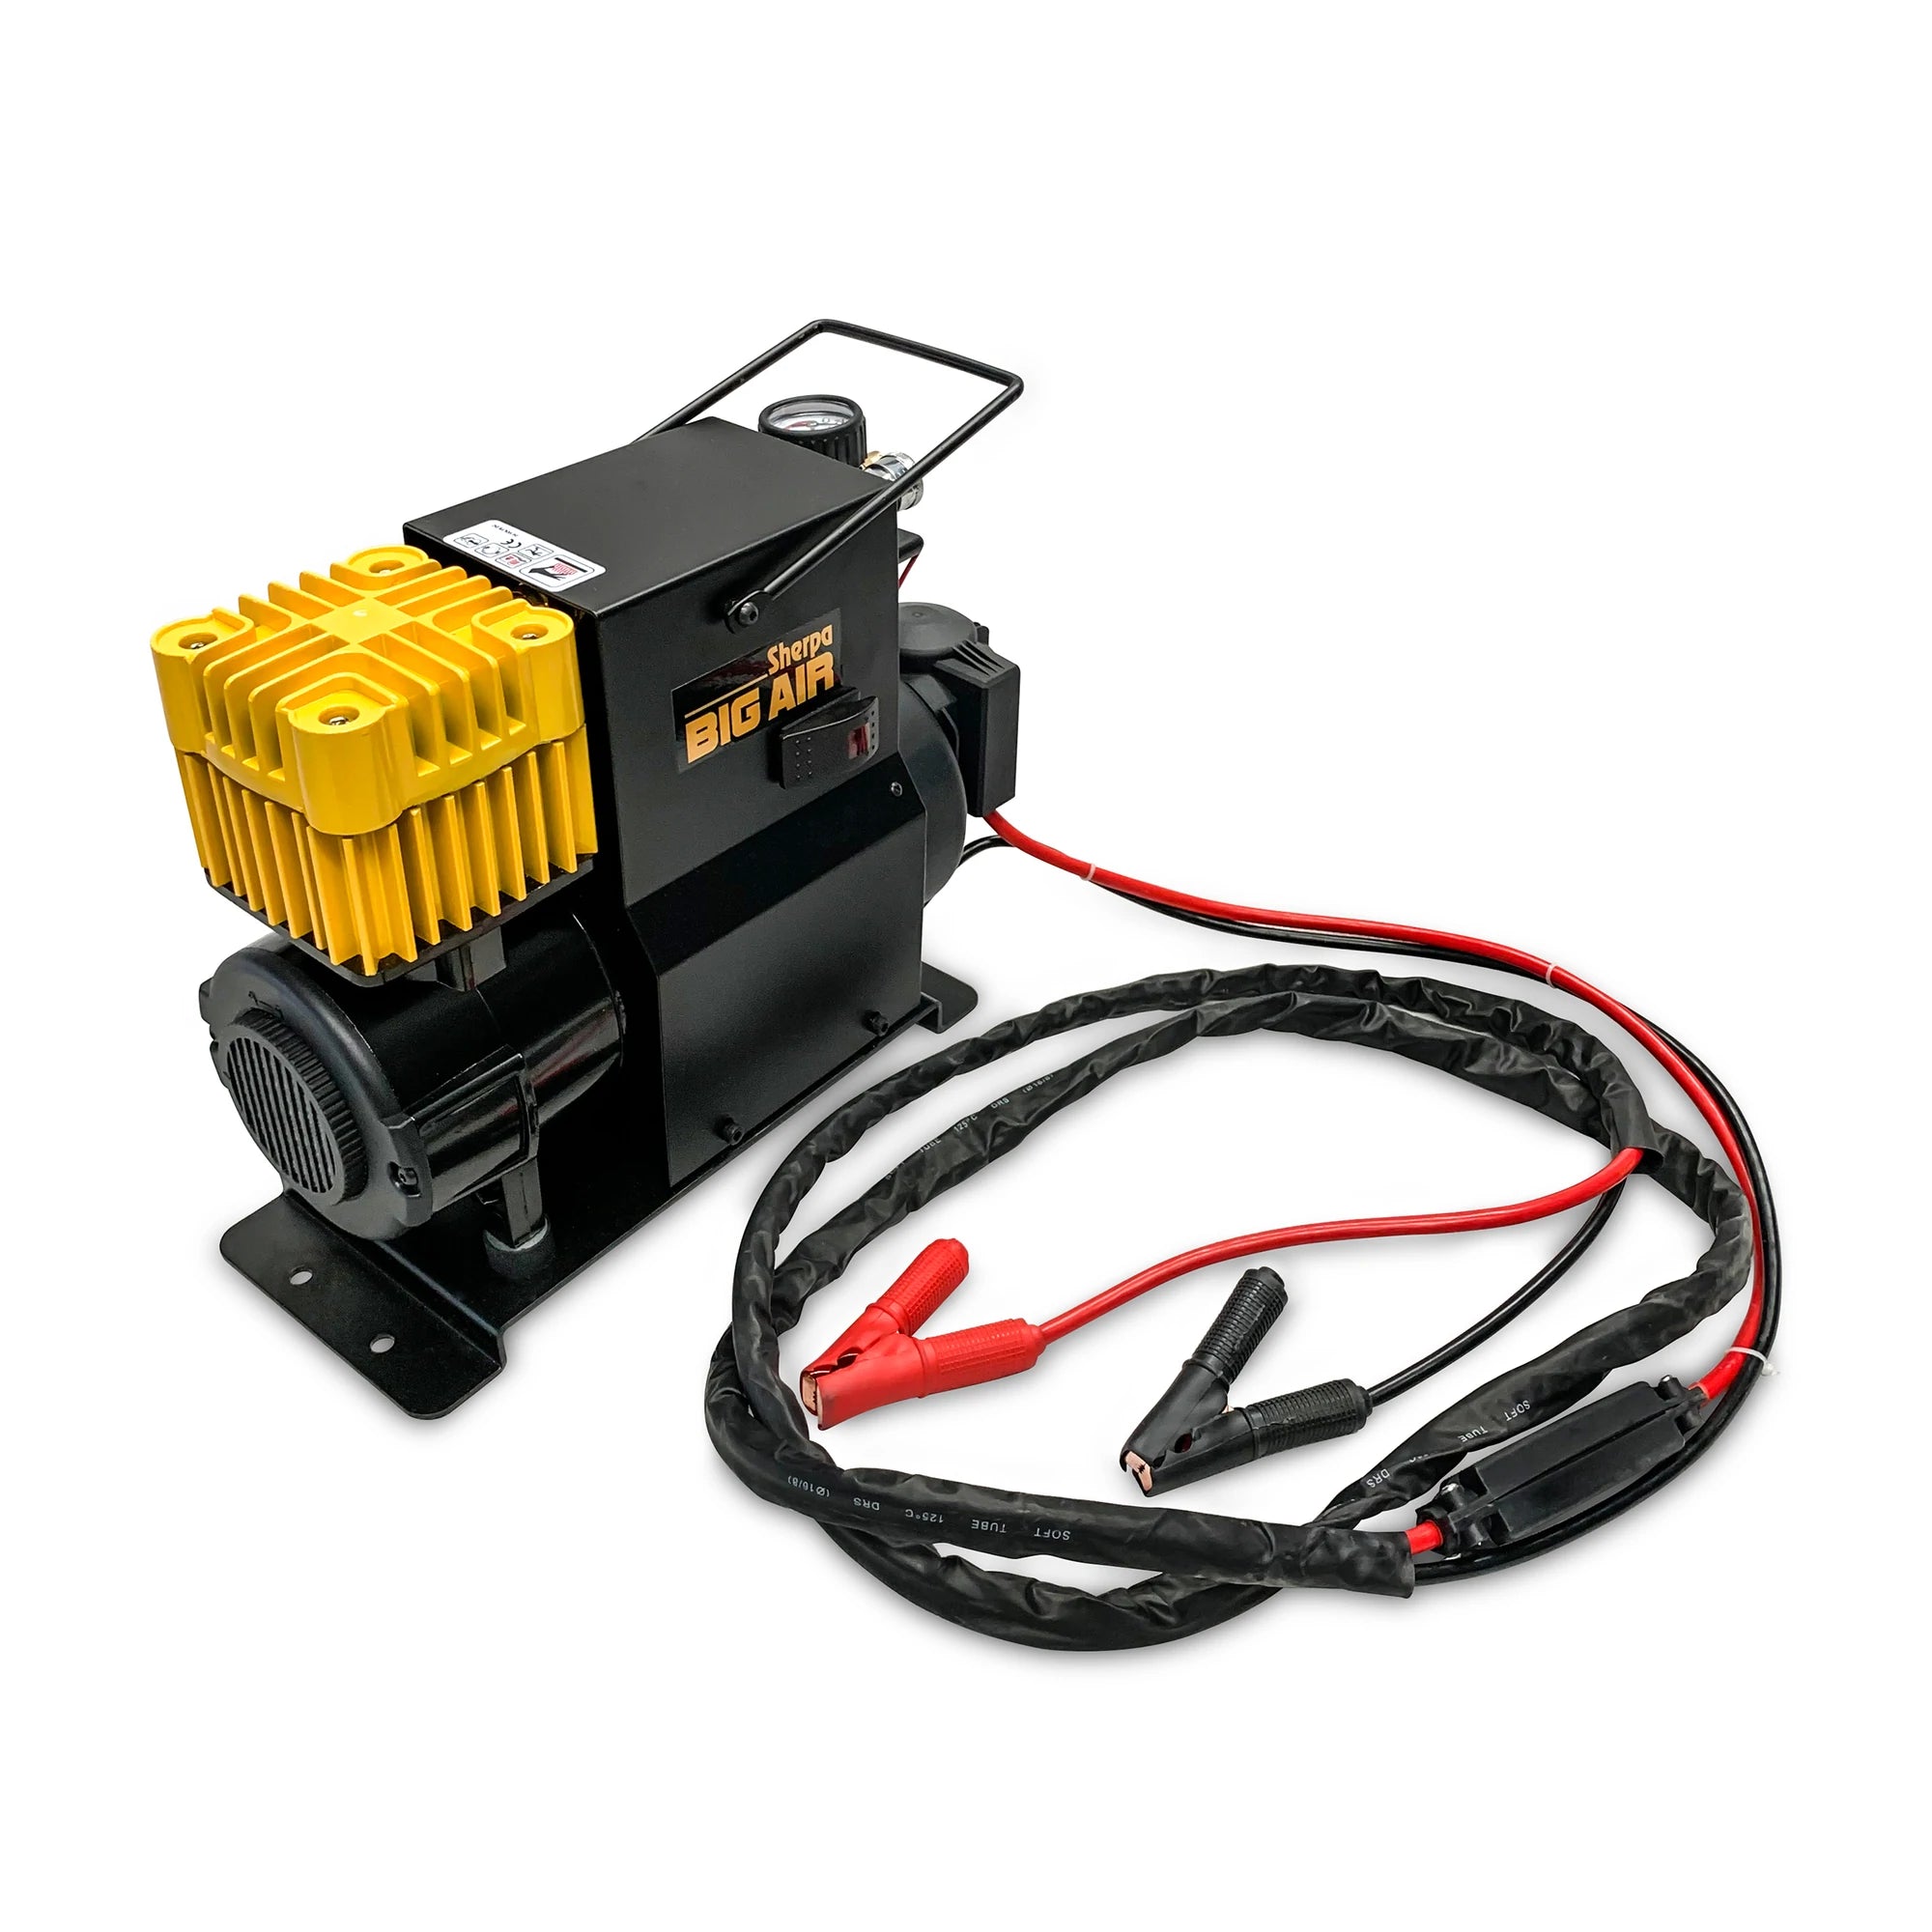 PORTABLE 12V OIL FREE AIR COMPRESSOR Sherpa have built on their high performance winch designs to couple a massive electric motor to a completely new air compressor. The Sherpa BIG AIR is an oil free compressor that has been optimised to deliver air up to 90 PSI meaning it can deliver higher volumes at more usable pressures. | Perth Pro Auto